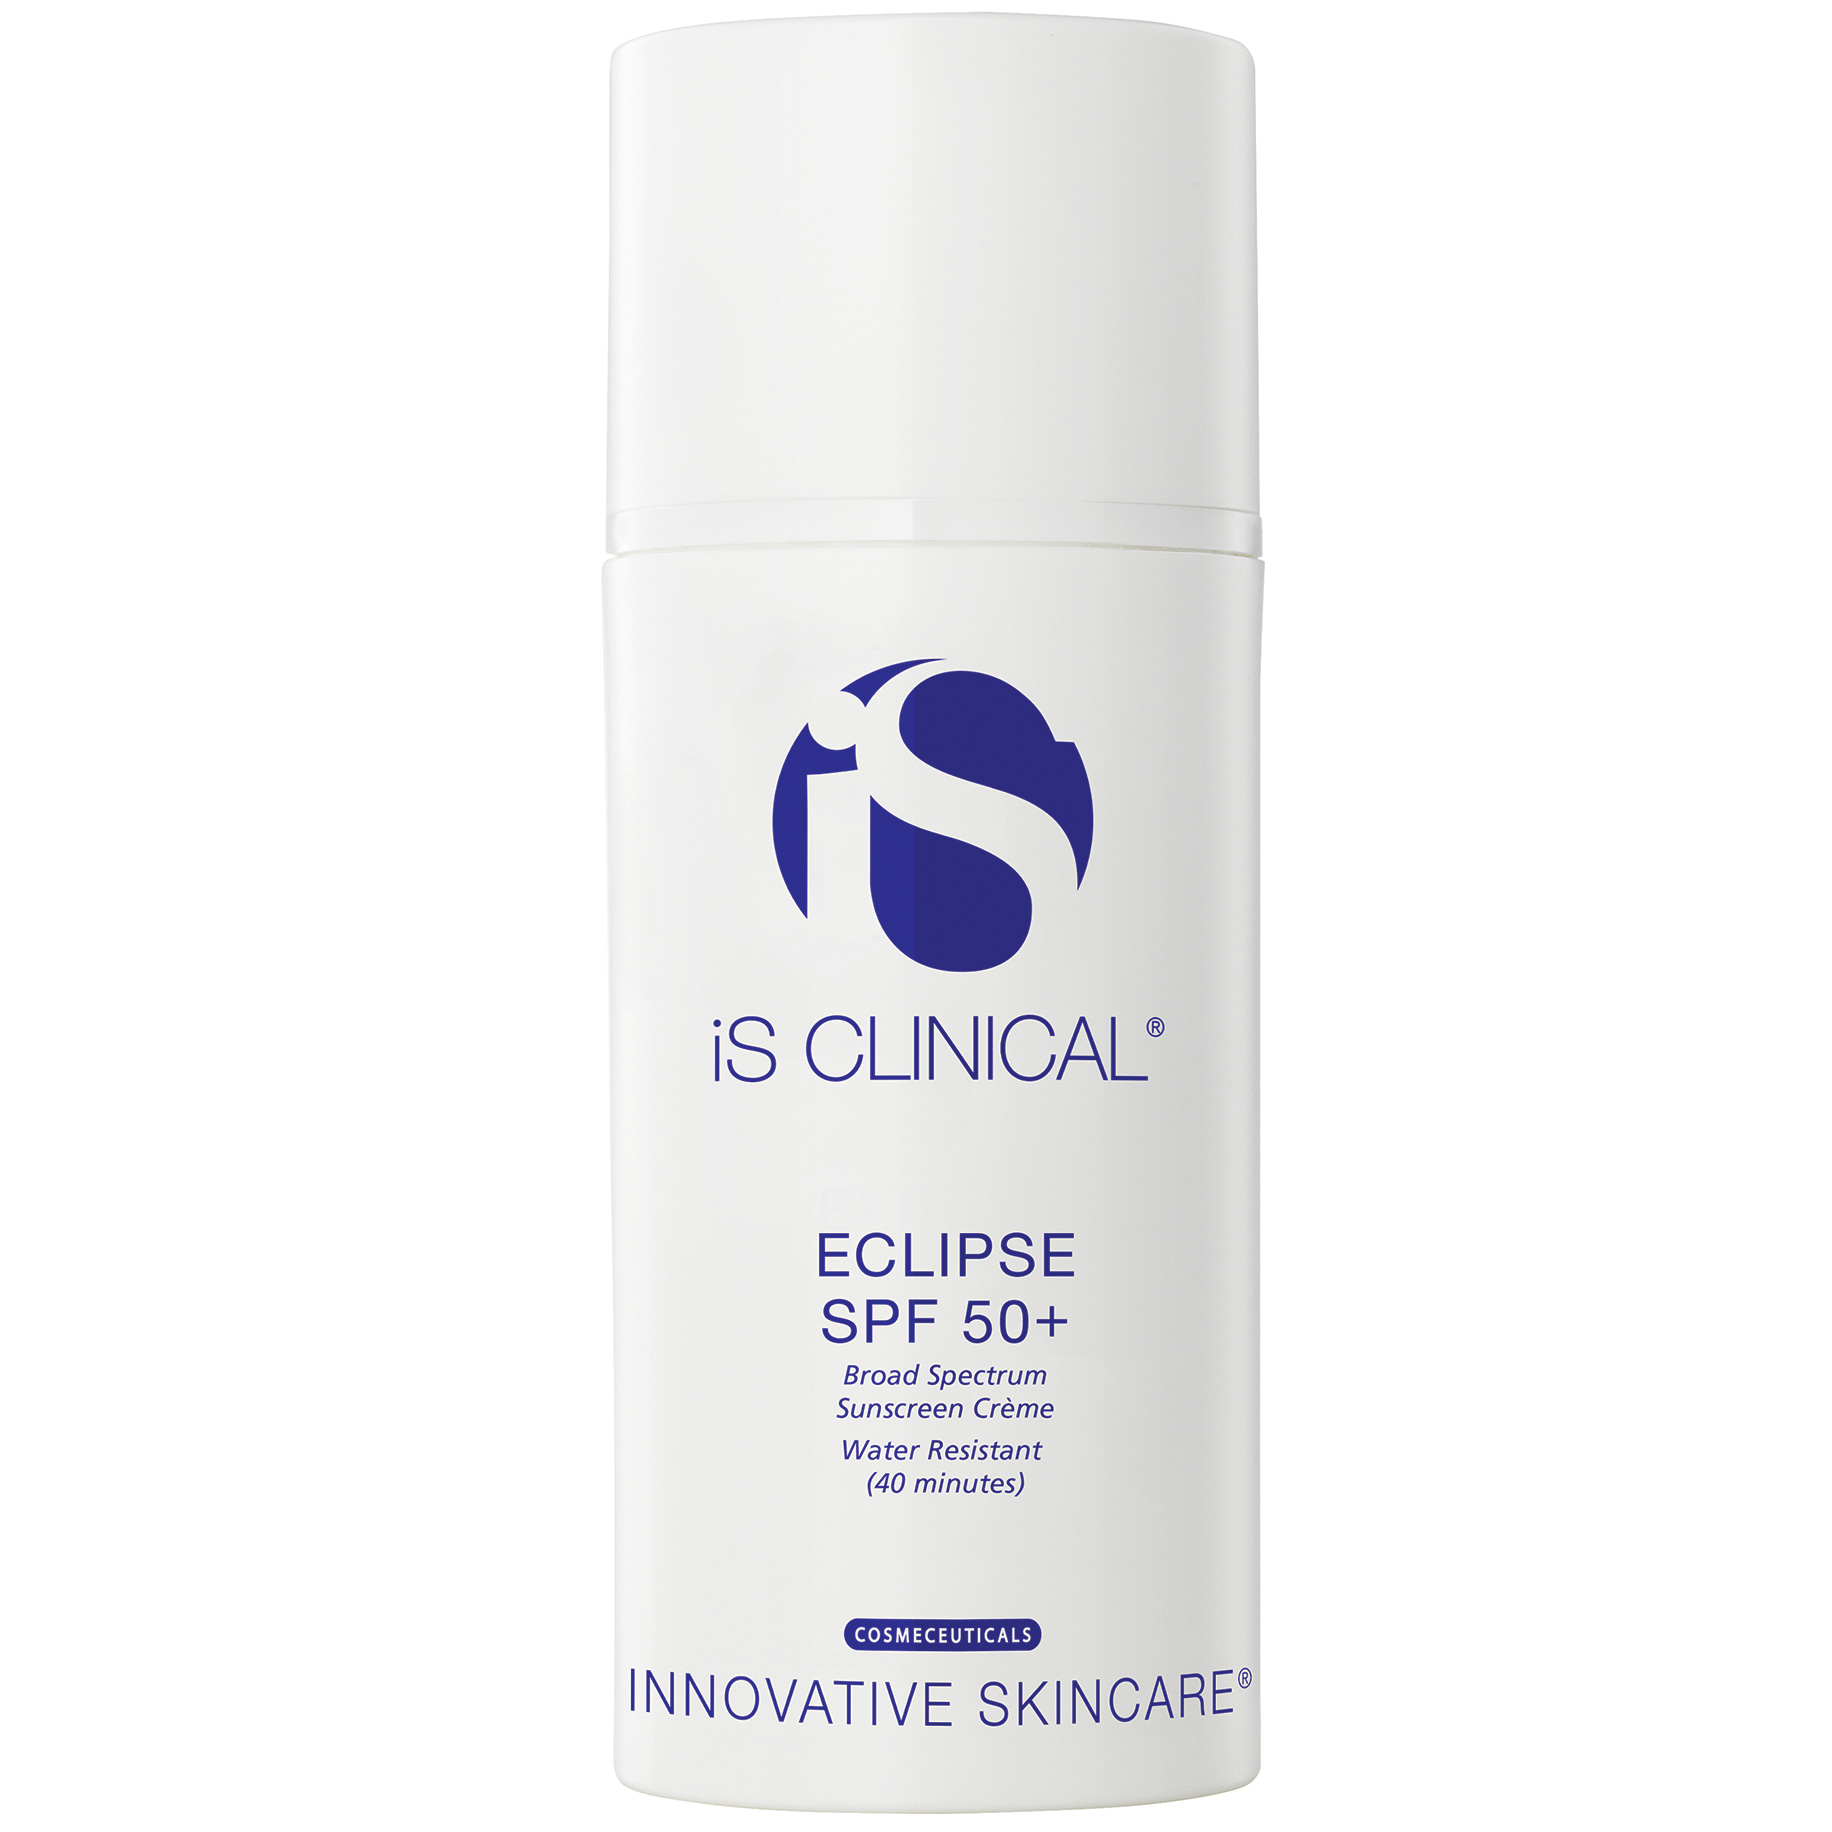 iS Clinical Eclipse SPF 50+ Translucent 